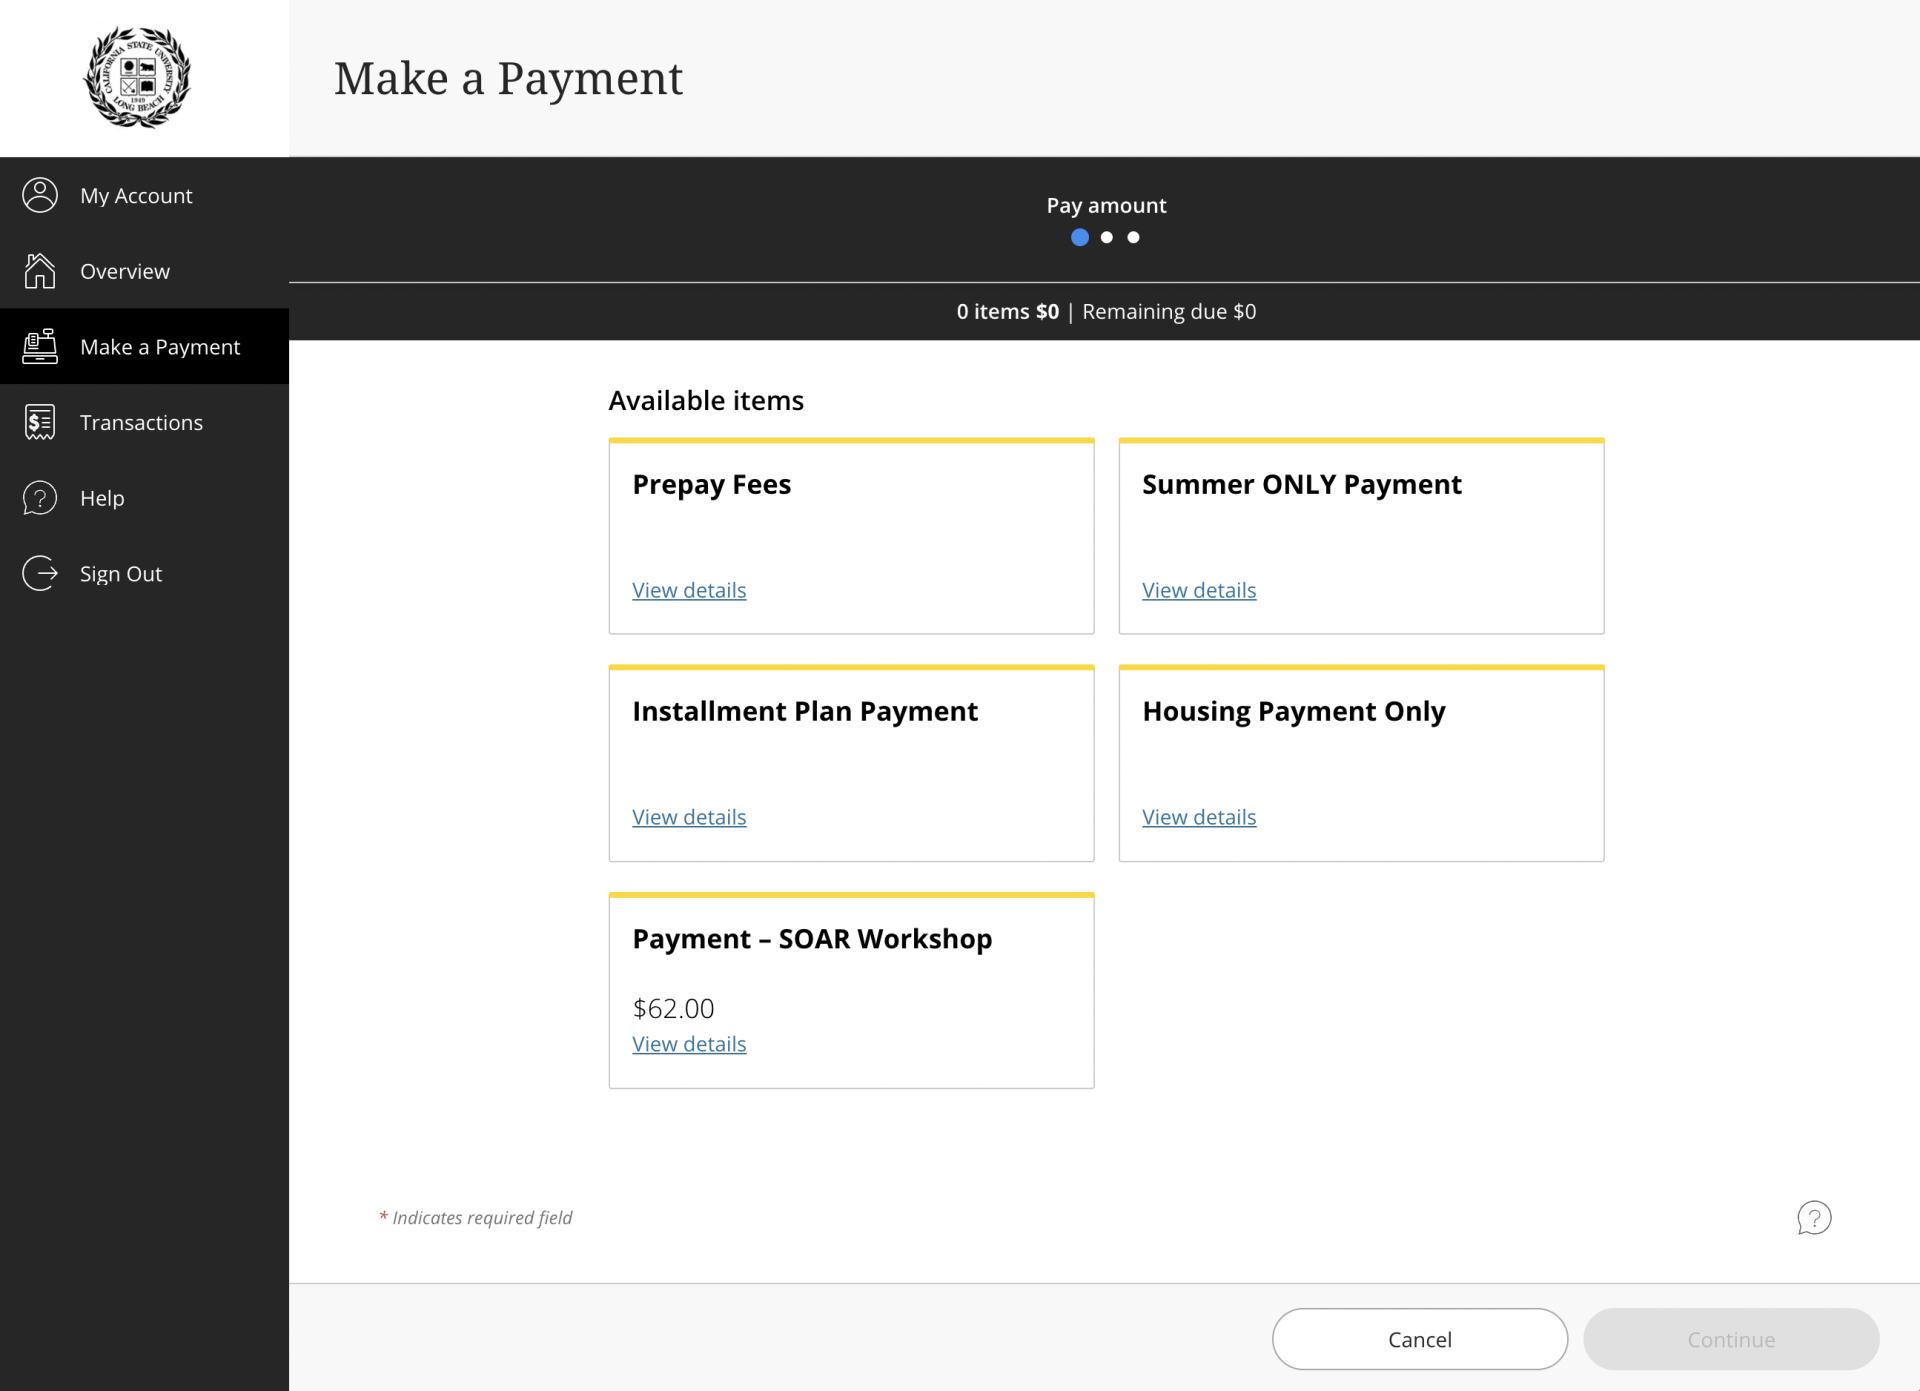 Screenshot of Make a Payment page with "Payment - SOAR Works